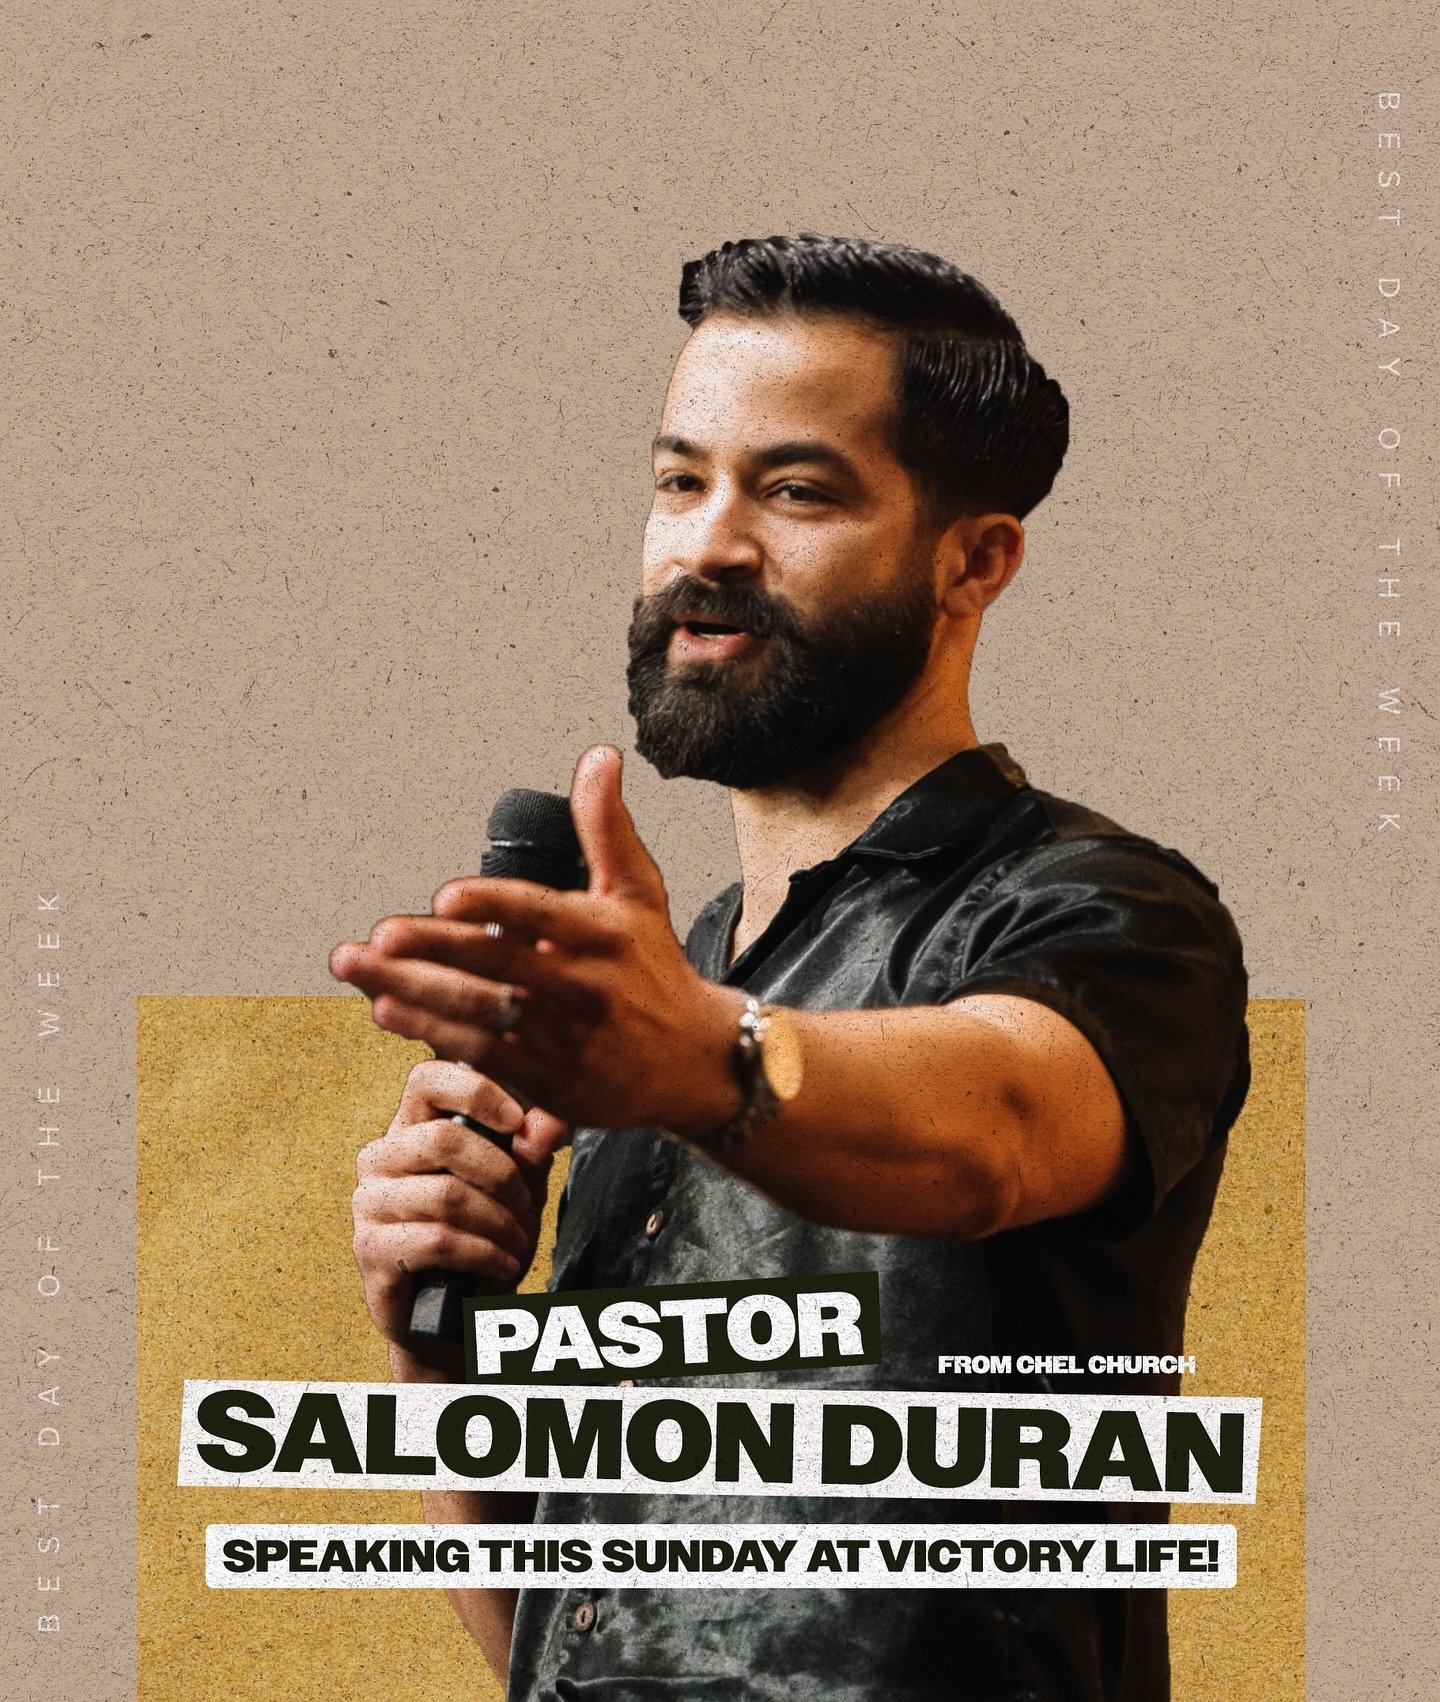 VLC, you&rsquo;re in for a treat this Sunday! Join us at 10:15am for a special service with Church Planter and Pastor Salomon Duran from Chel Church. We promise you won&rsquo;t want to miss it!

(also, it&rsquo;s bittersweet because it&rsquo;s our la